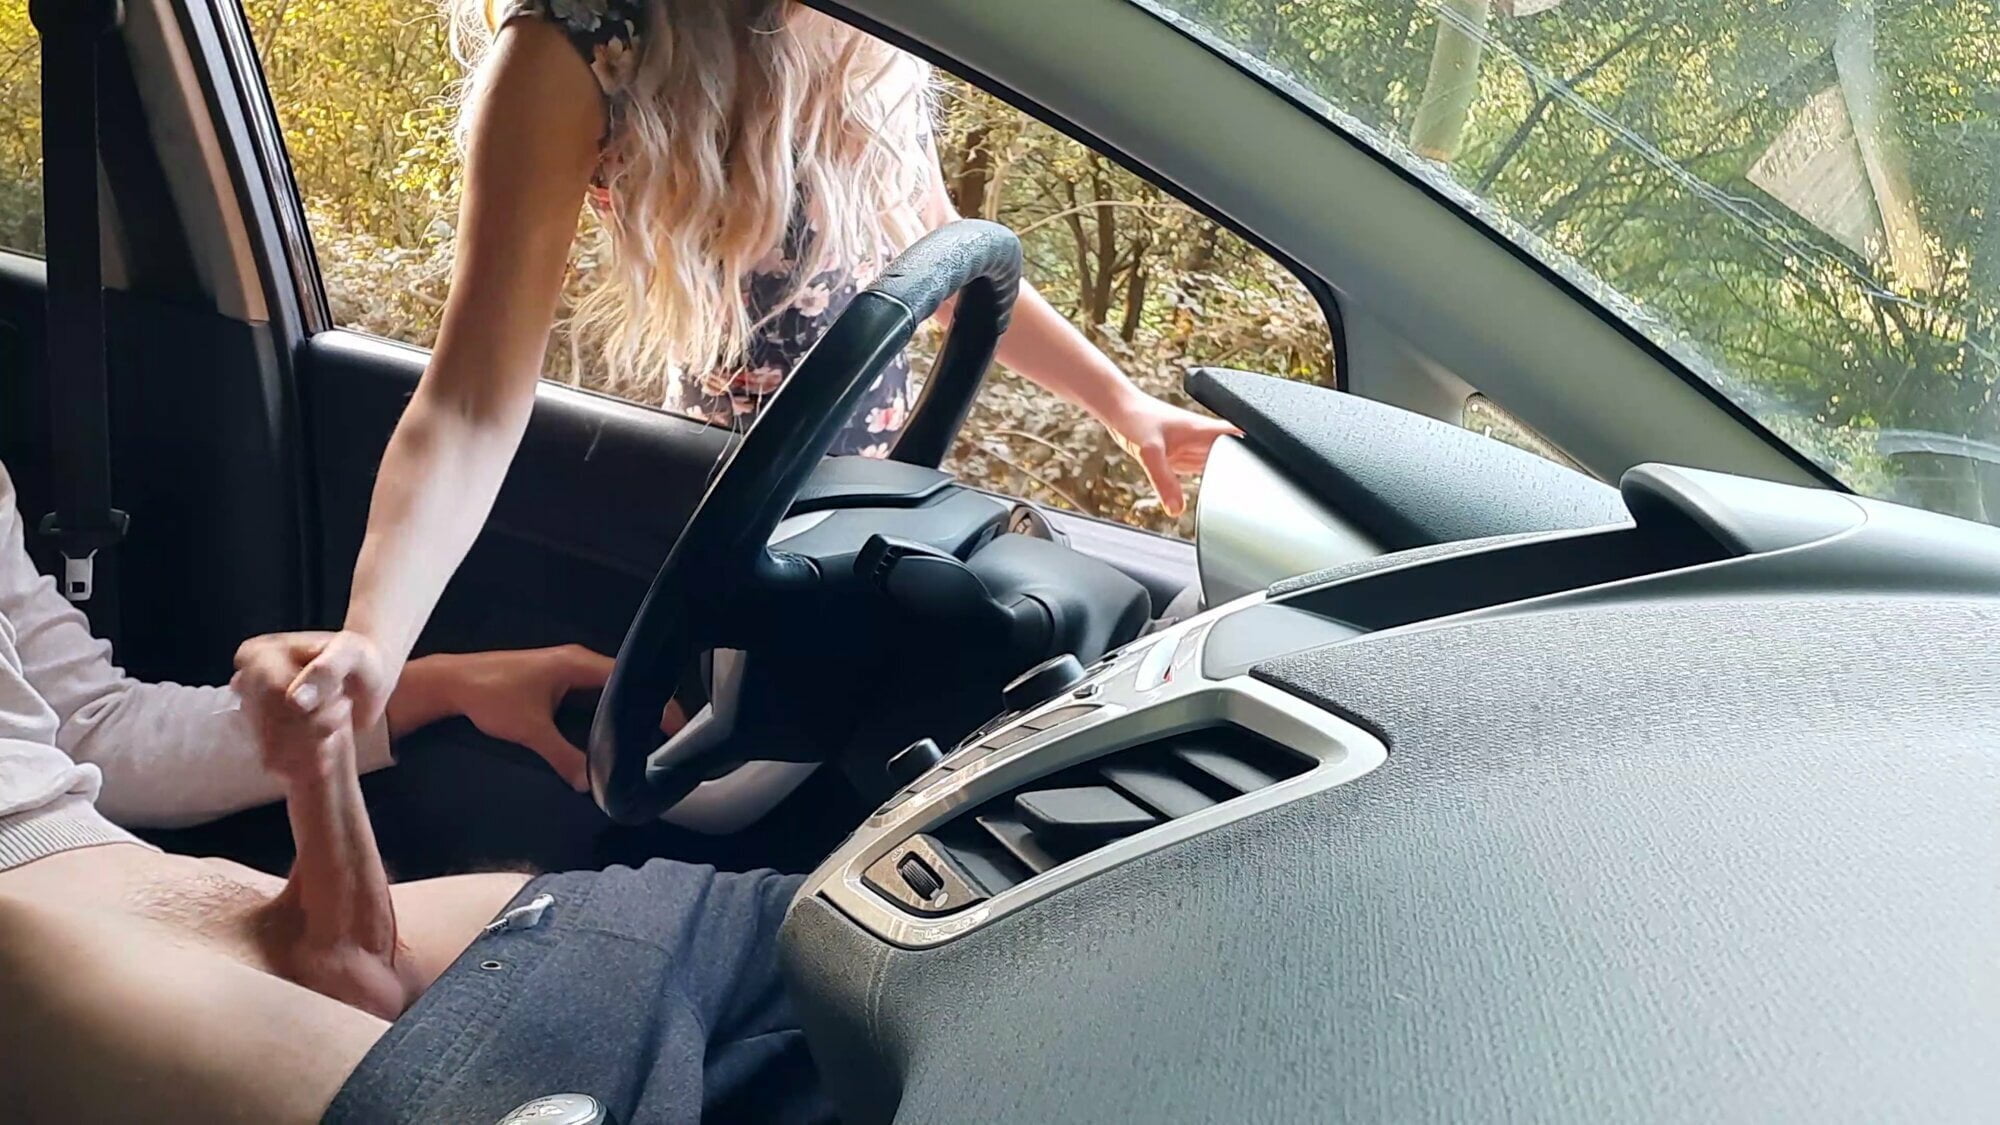 david saric recommends flashing cock from car pic